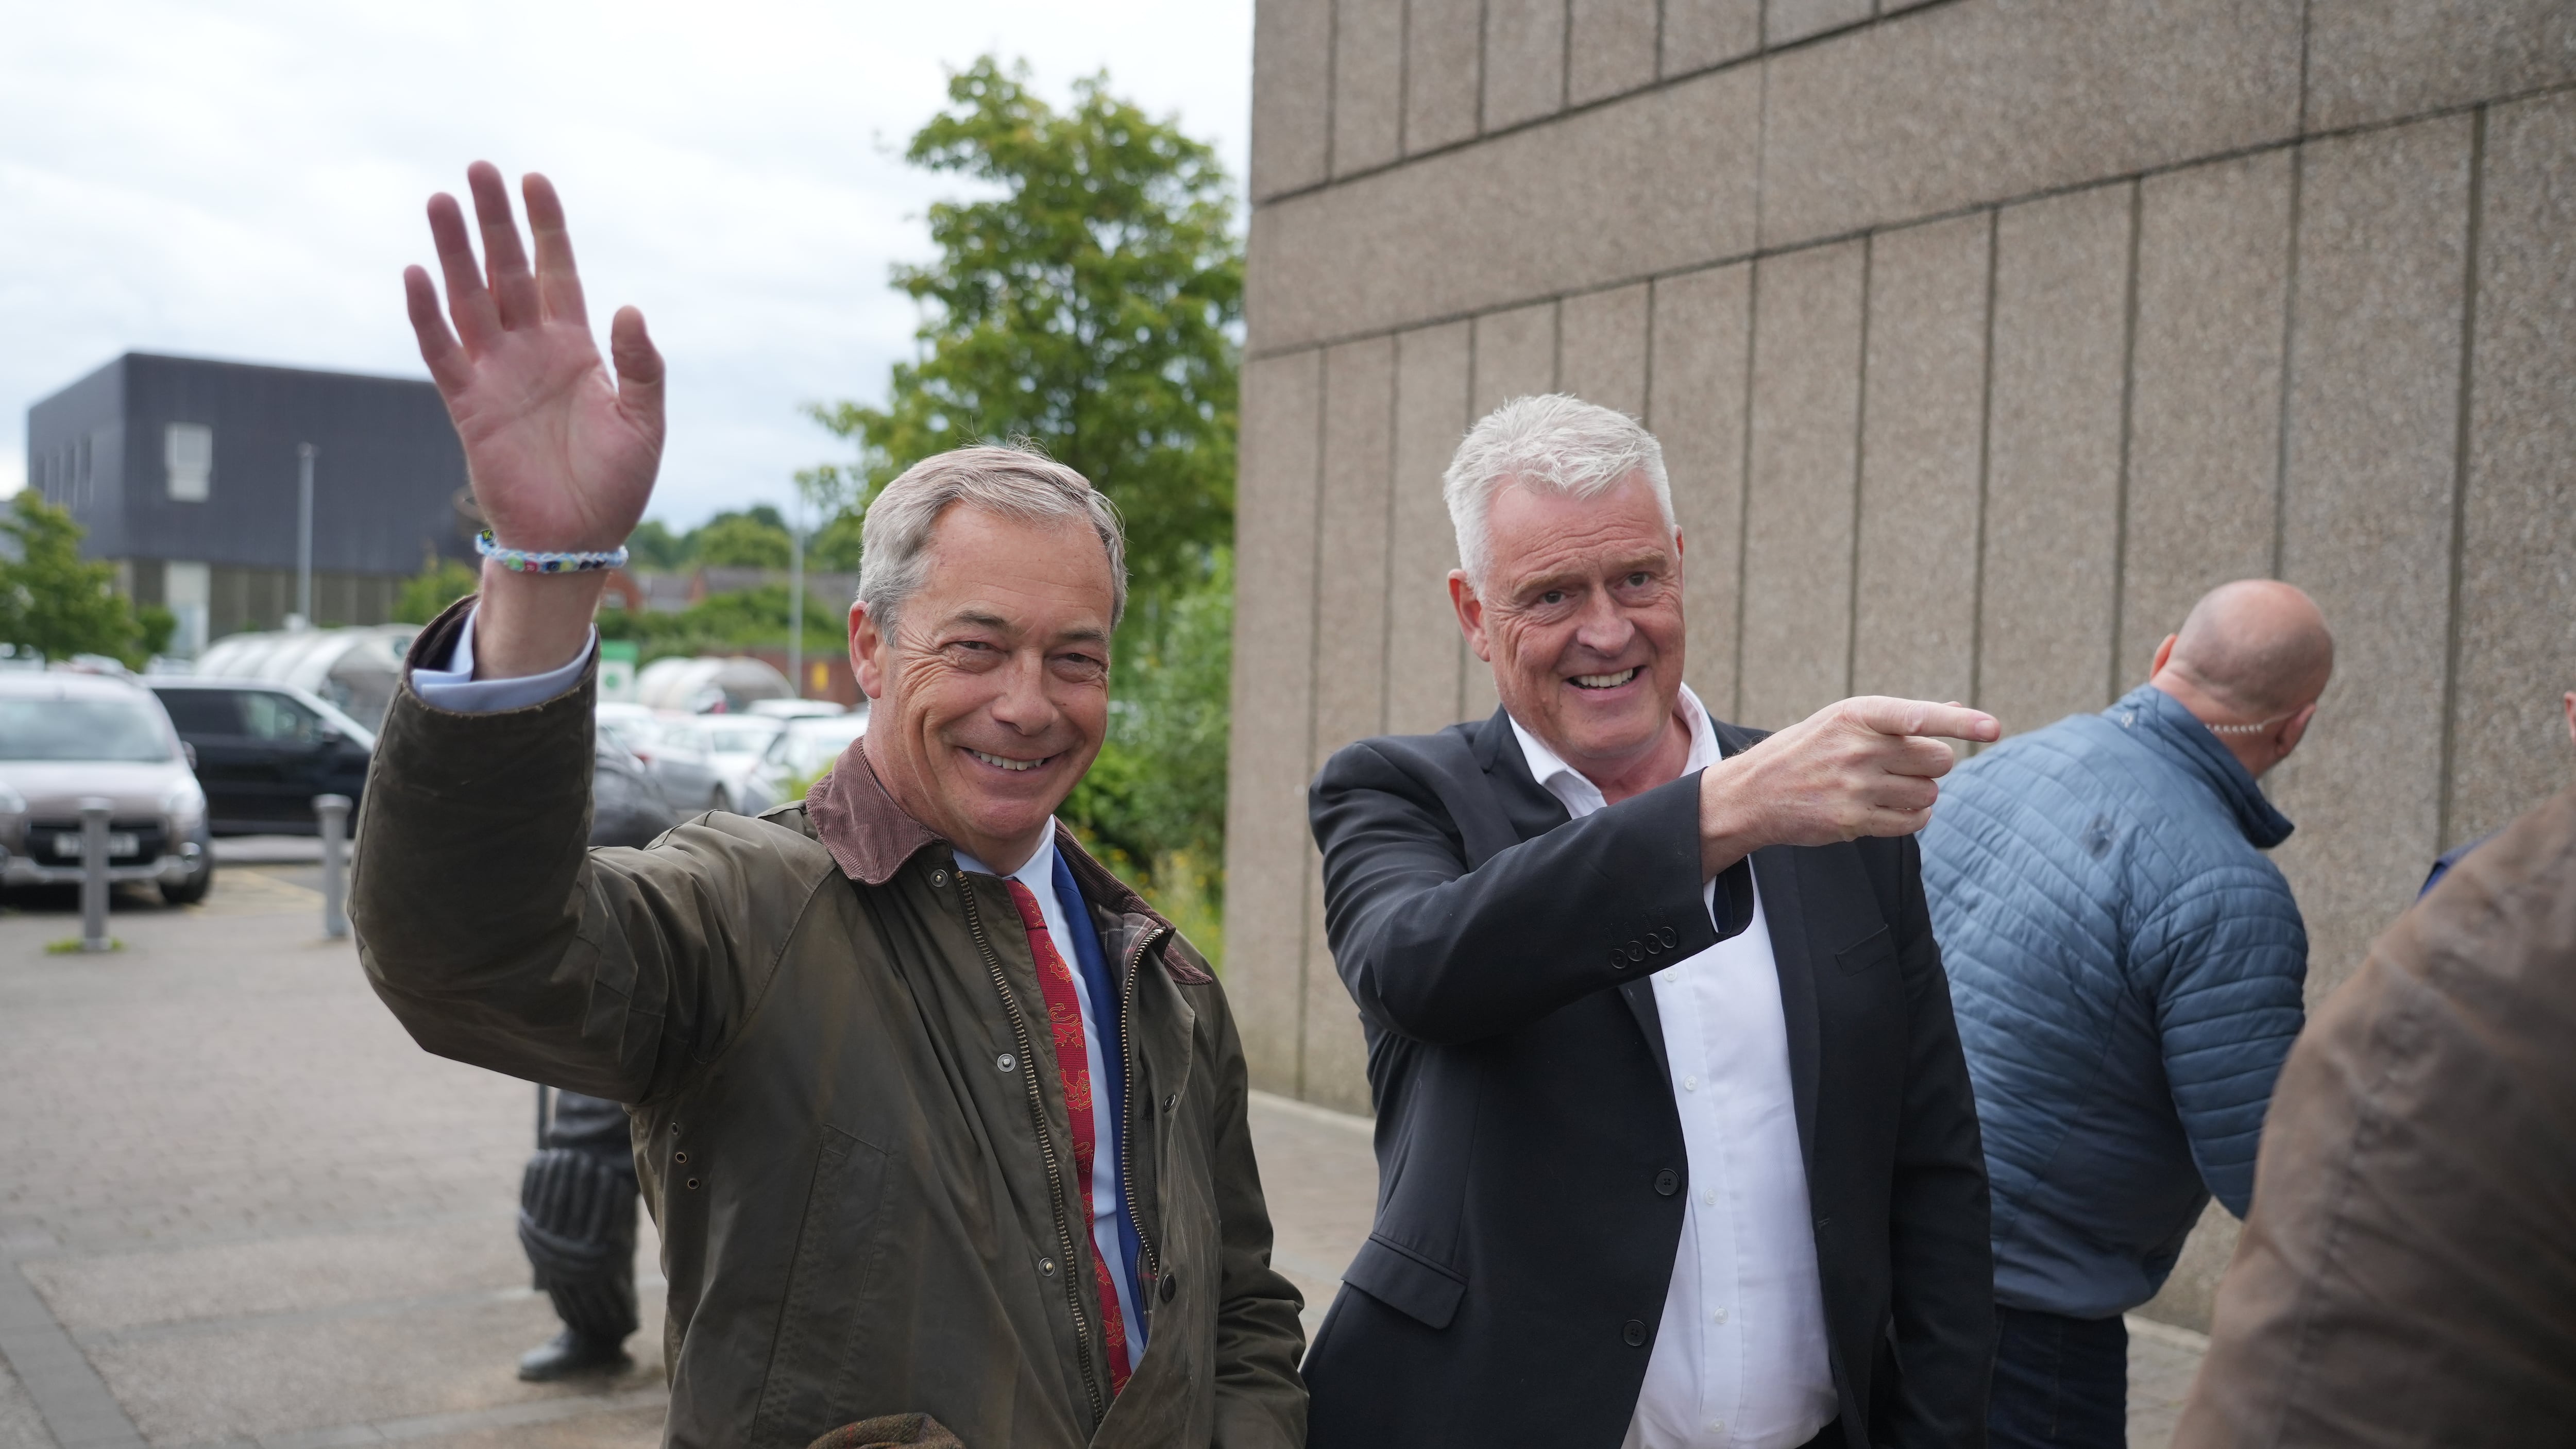 Reform UK leader Nigel Farage and Lee Anderson, Reform UK parliamentary candidate for Ashfield, in Ashfield, Nottinghamshire